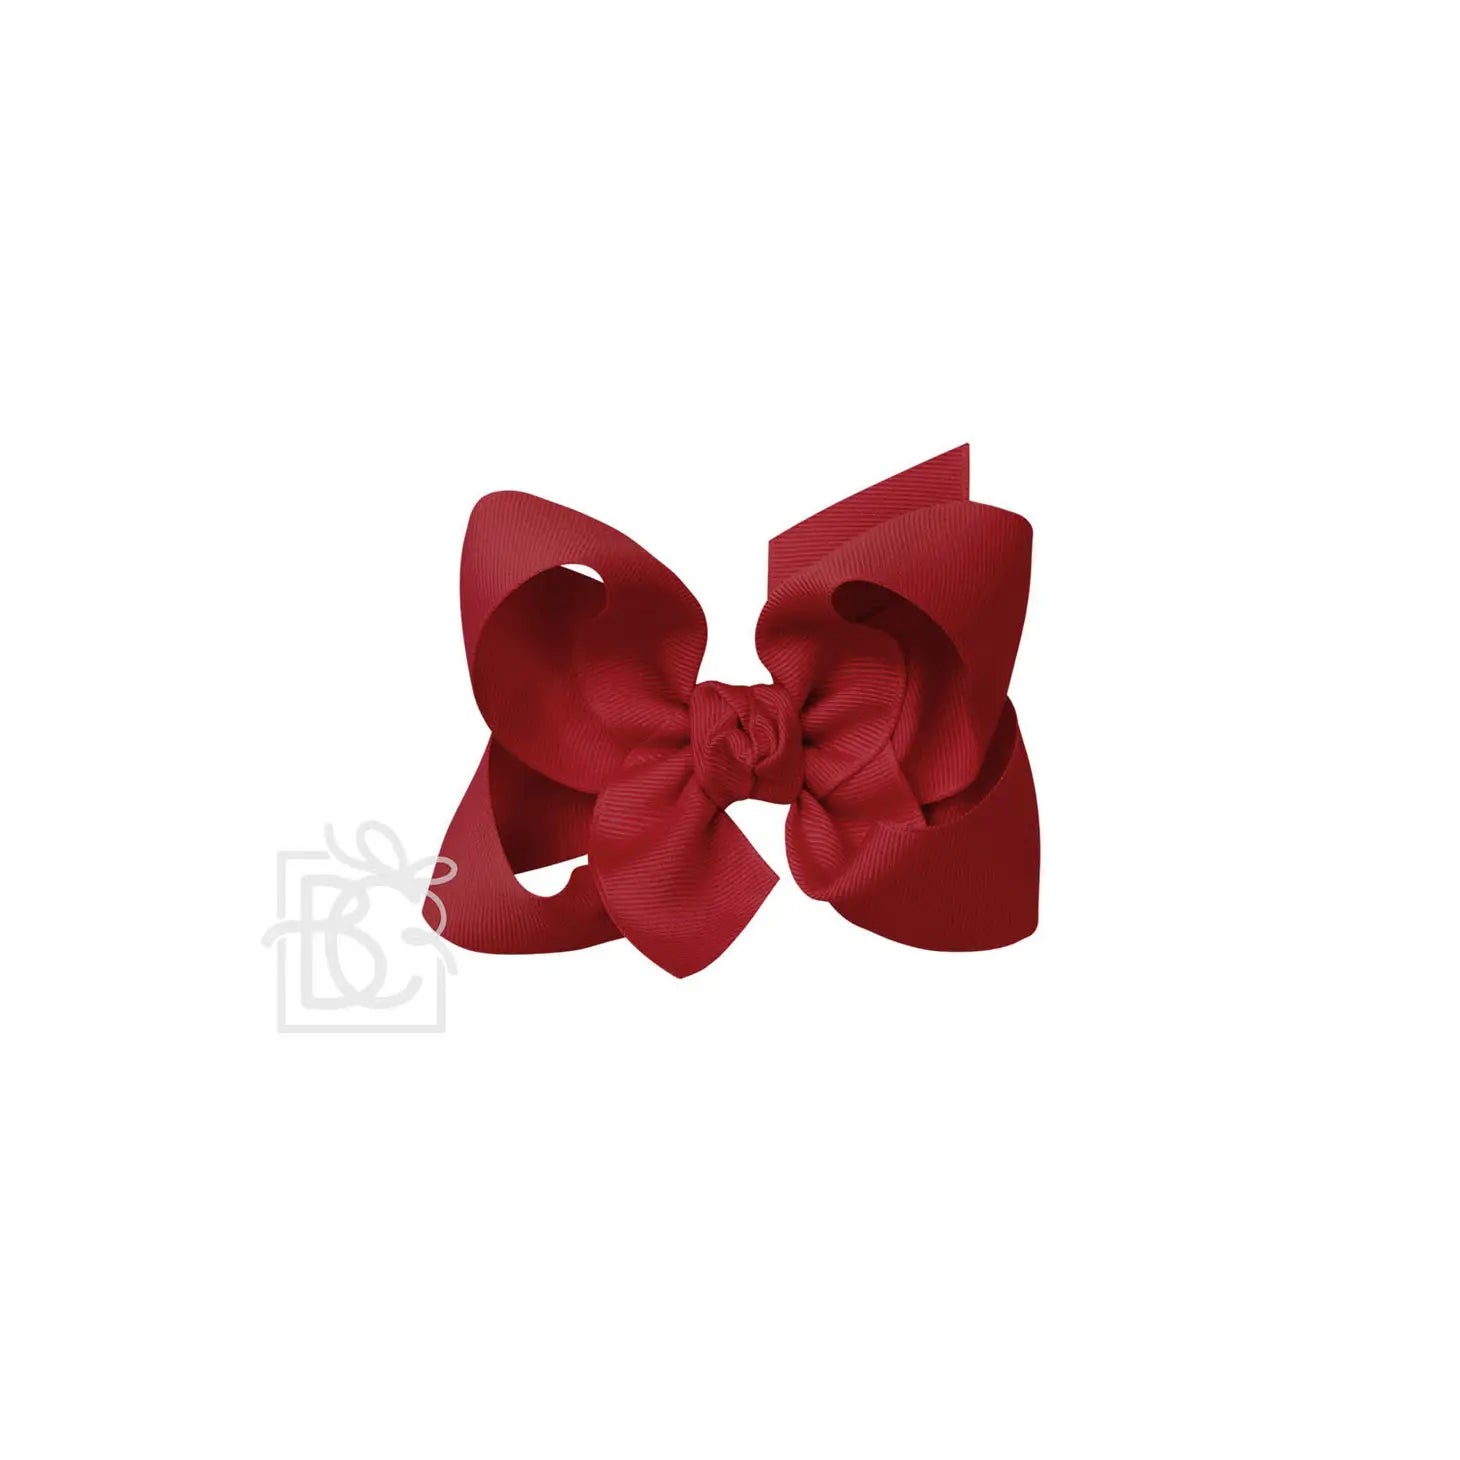 Large Bow in Cranberry  - Doodlebug's Children's Boutique